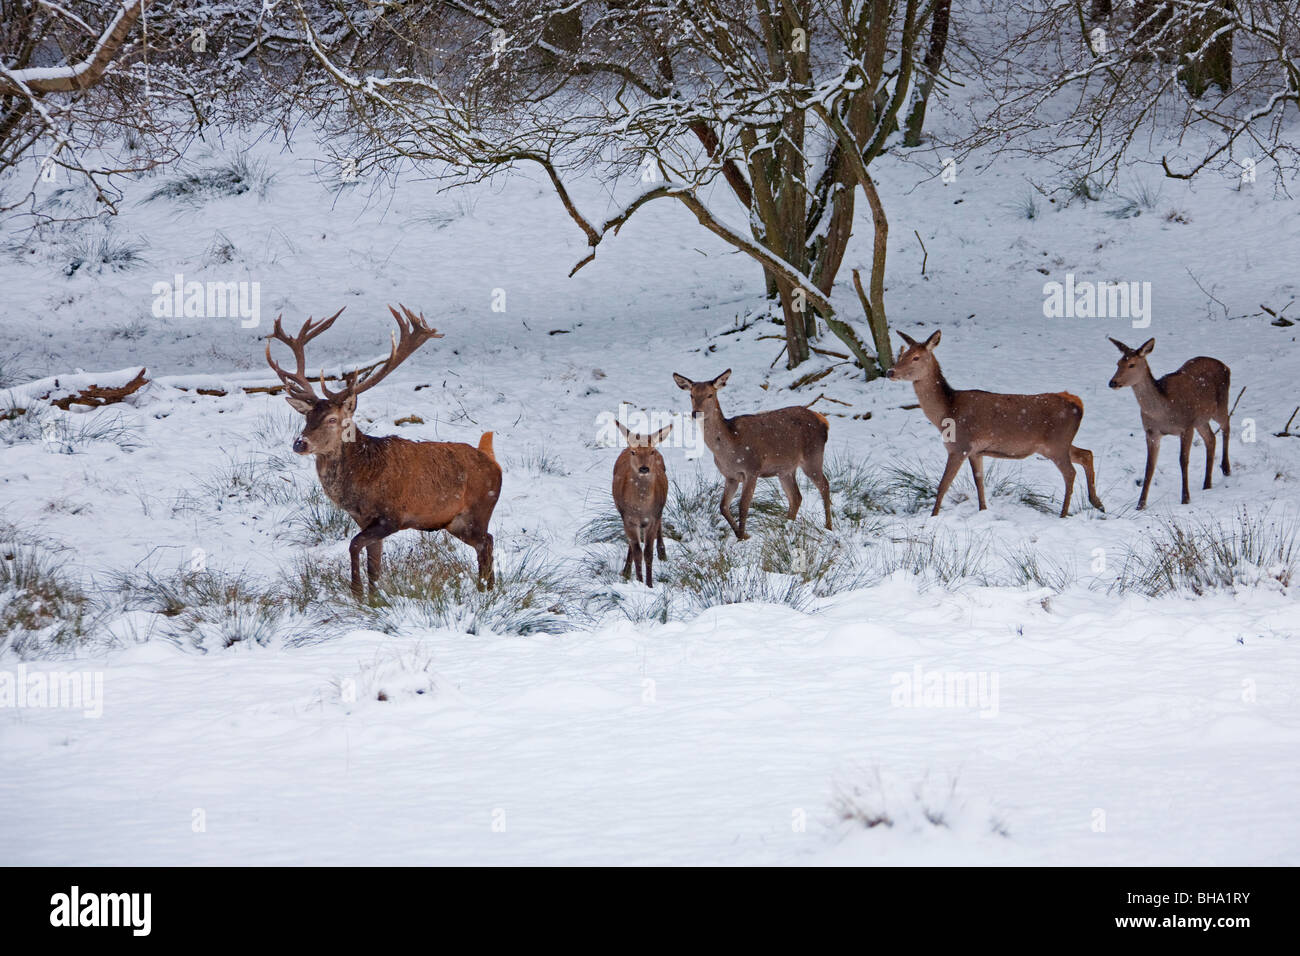 Red deer (Cervus elaphus) stag and females in the snow in winter, Germany Stock Photo